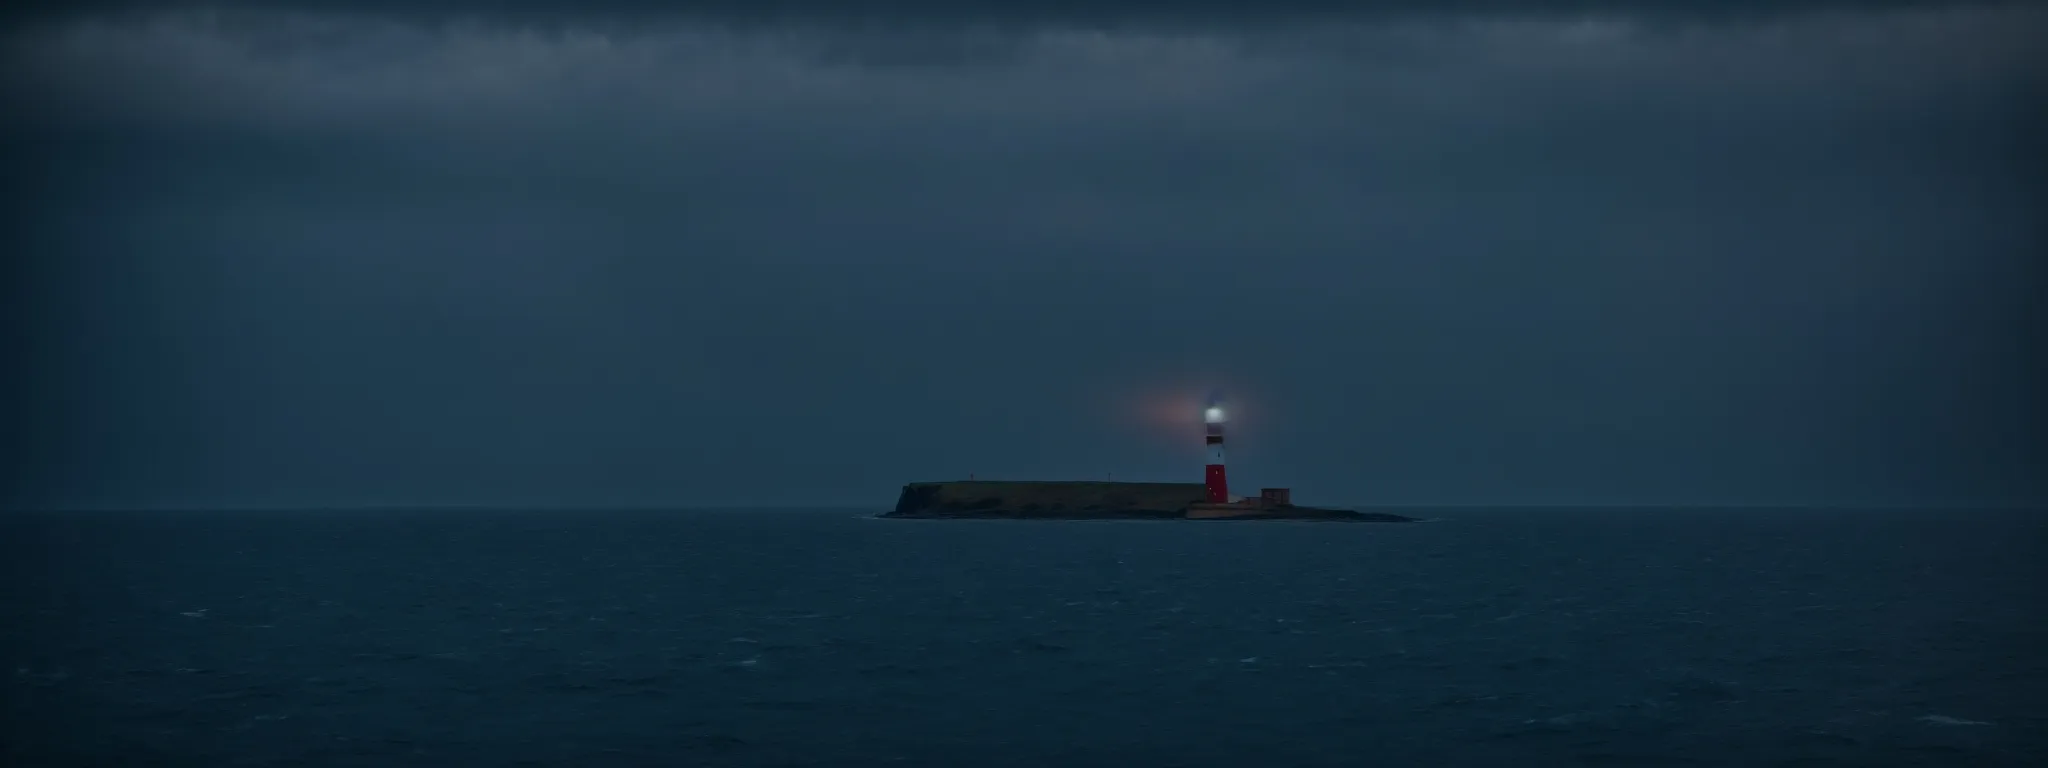 a lighthouse illuminating the darkened sea to guide ships, representing the beacon of guidance searchatlas offers.